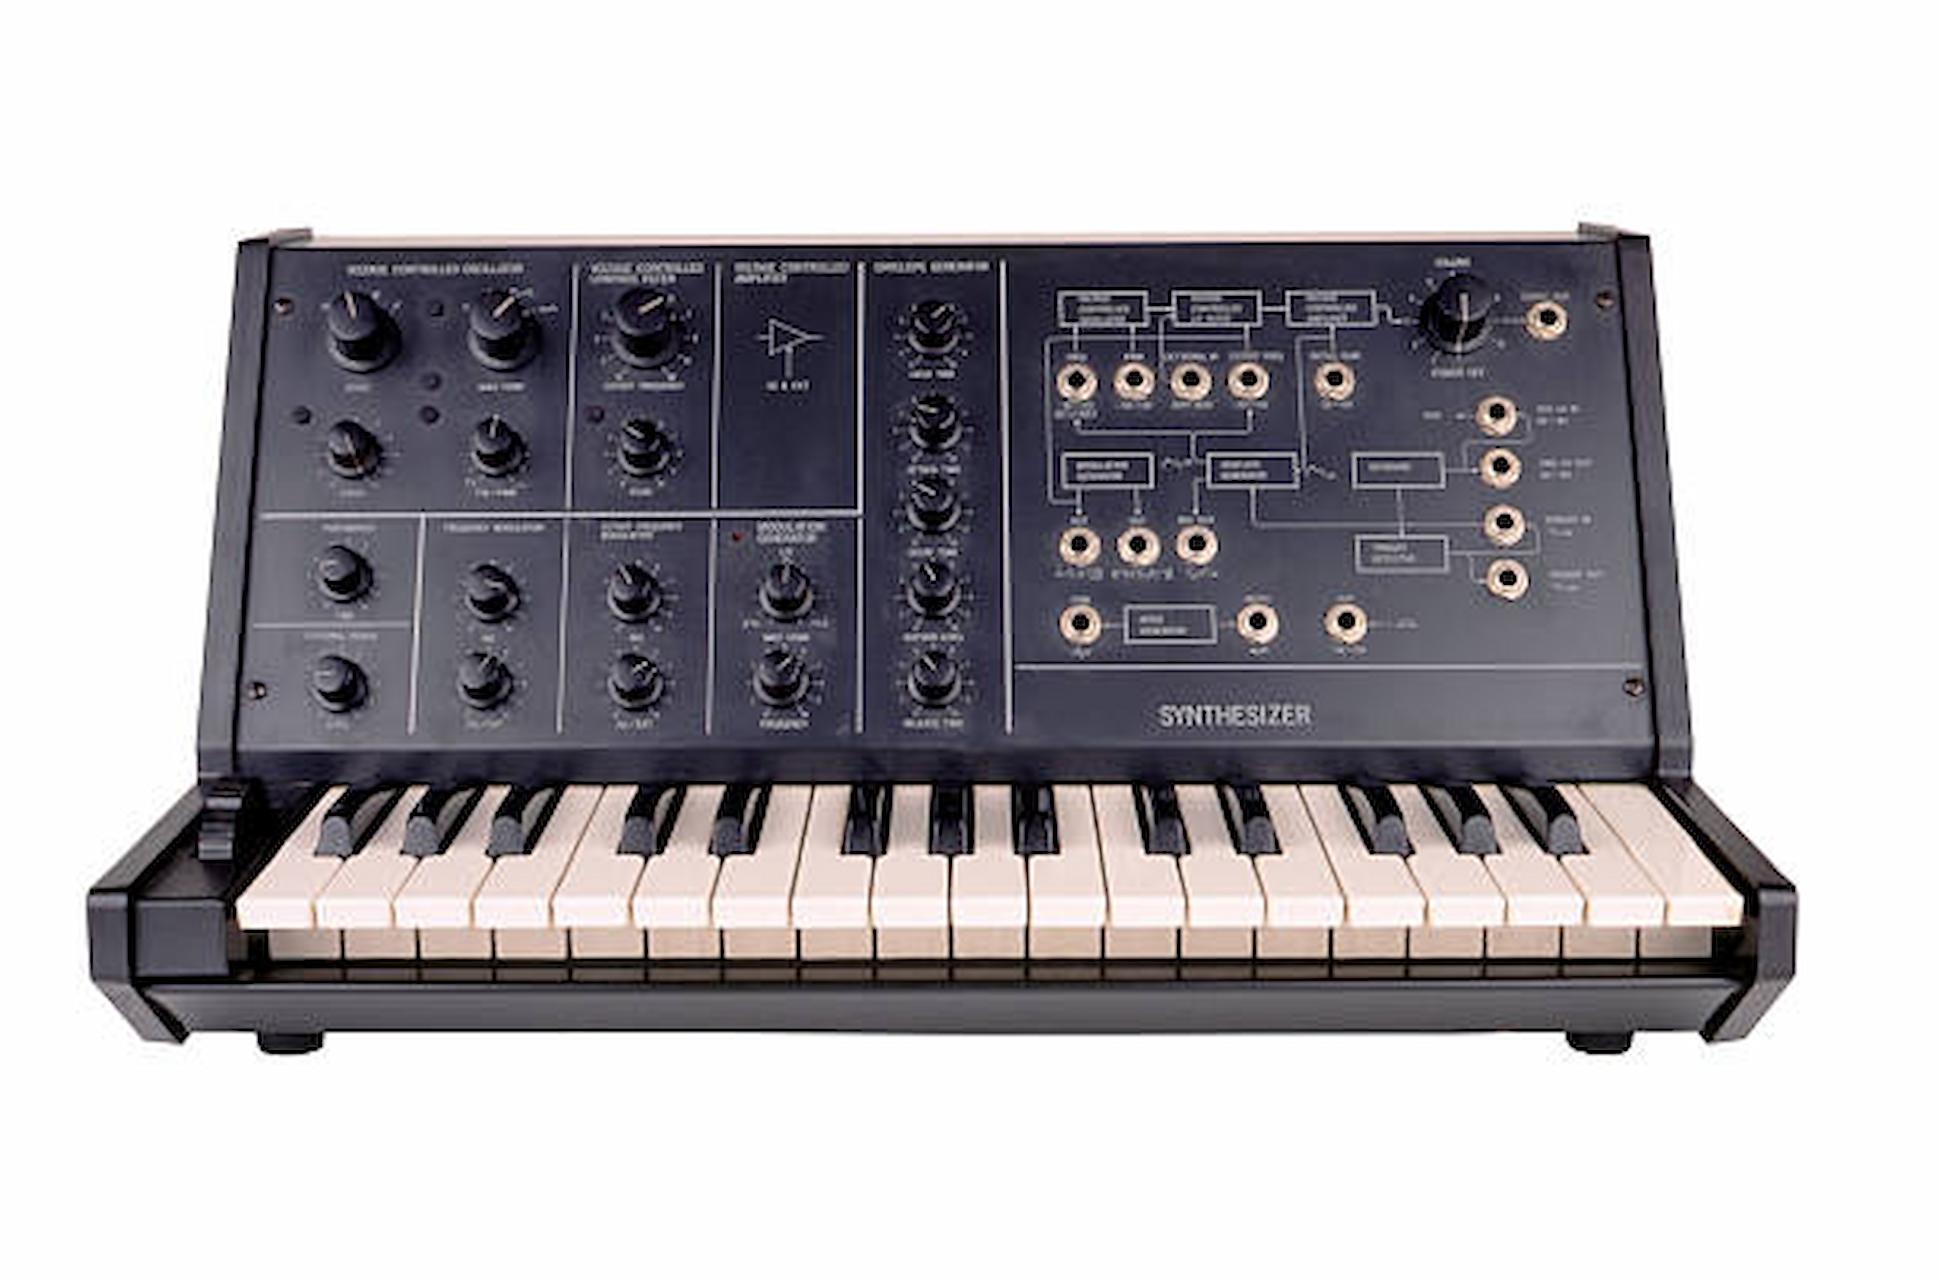 4 Features and Tips to Use Korg Synth